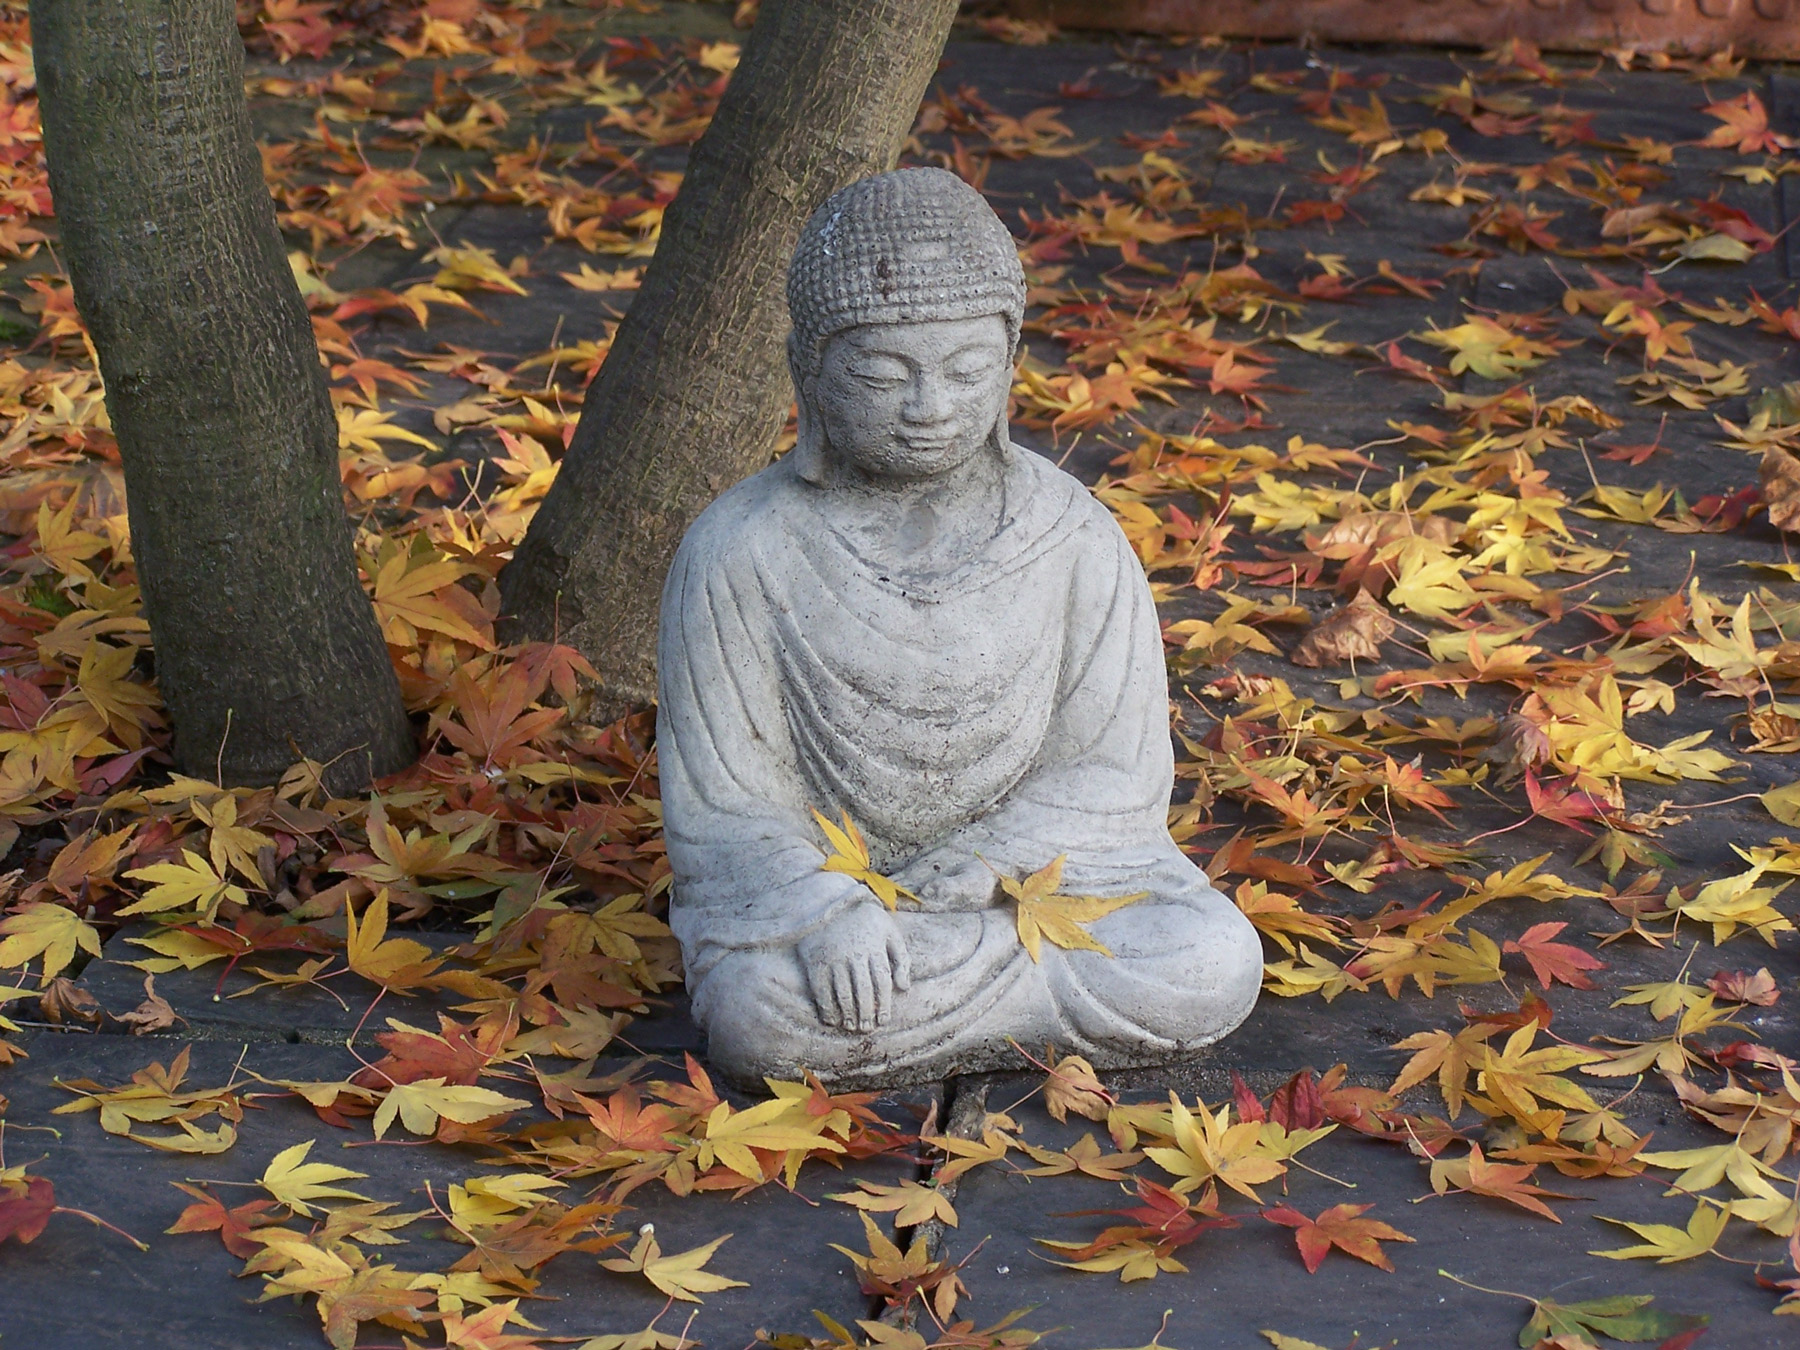 The Buddha with Maple leaves